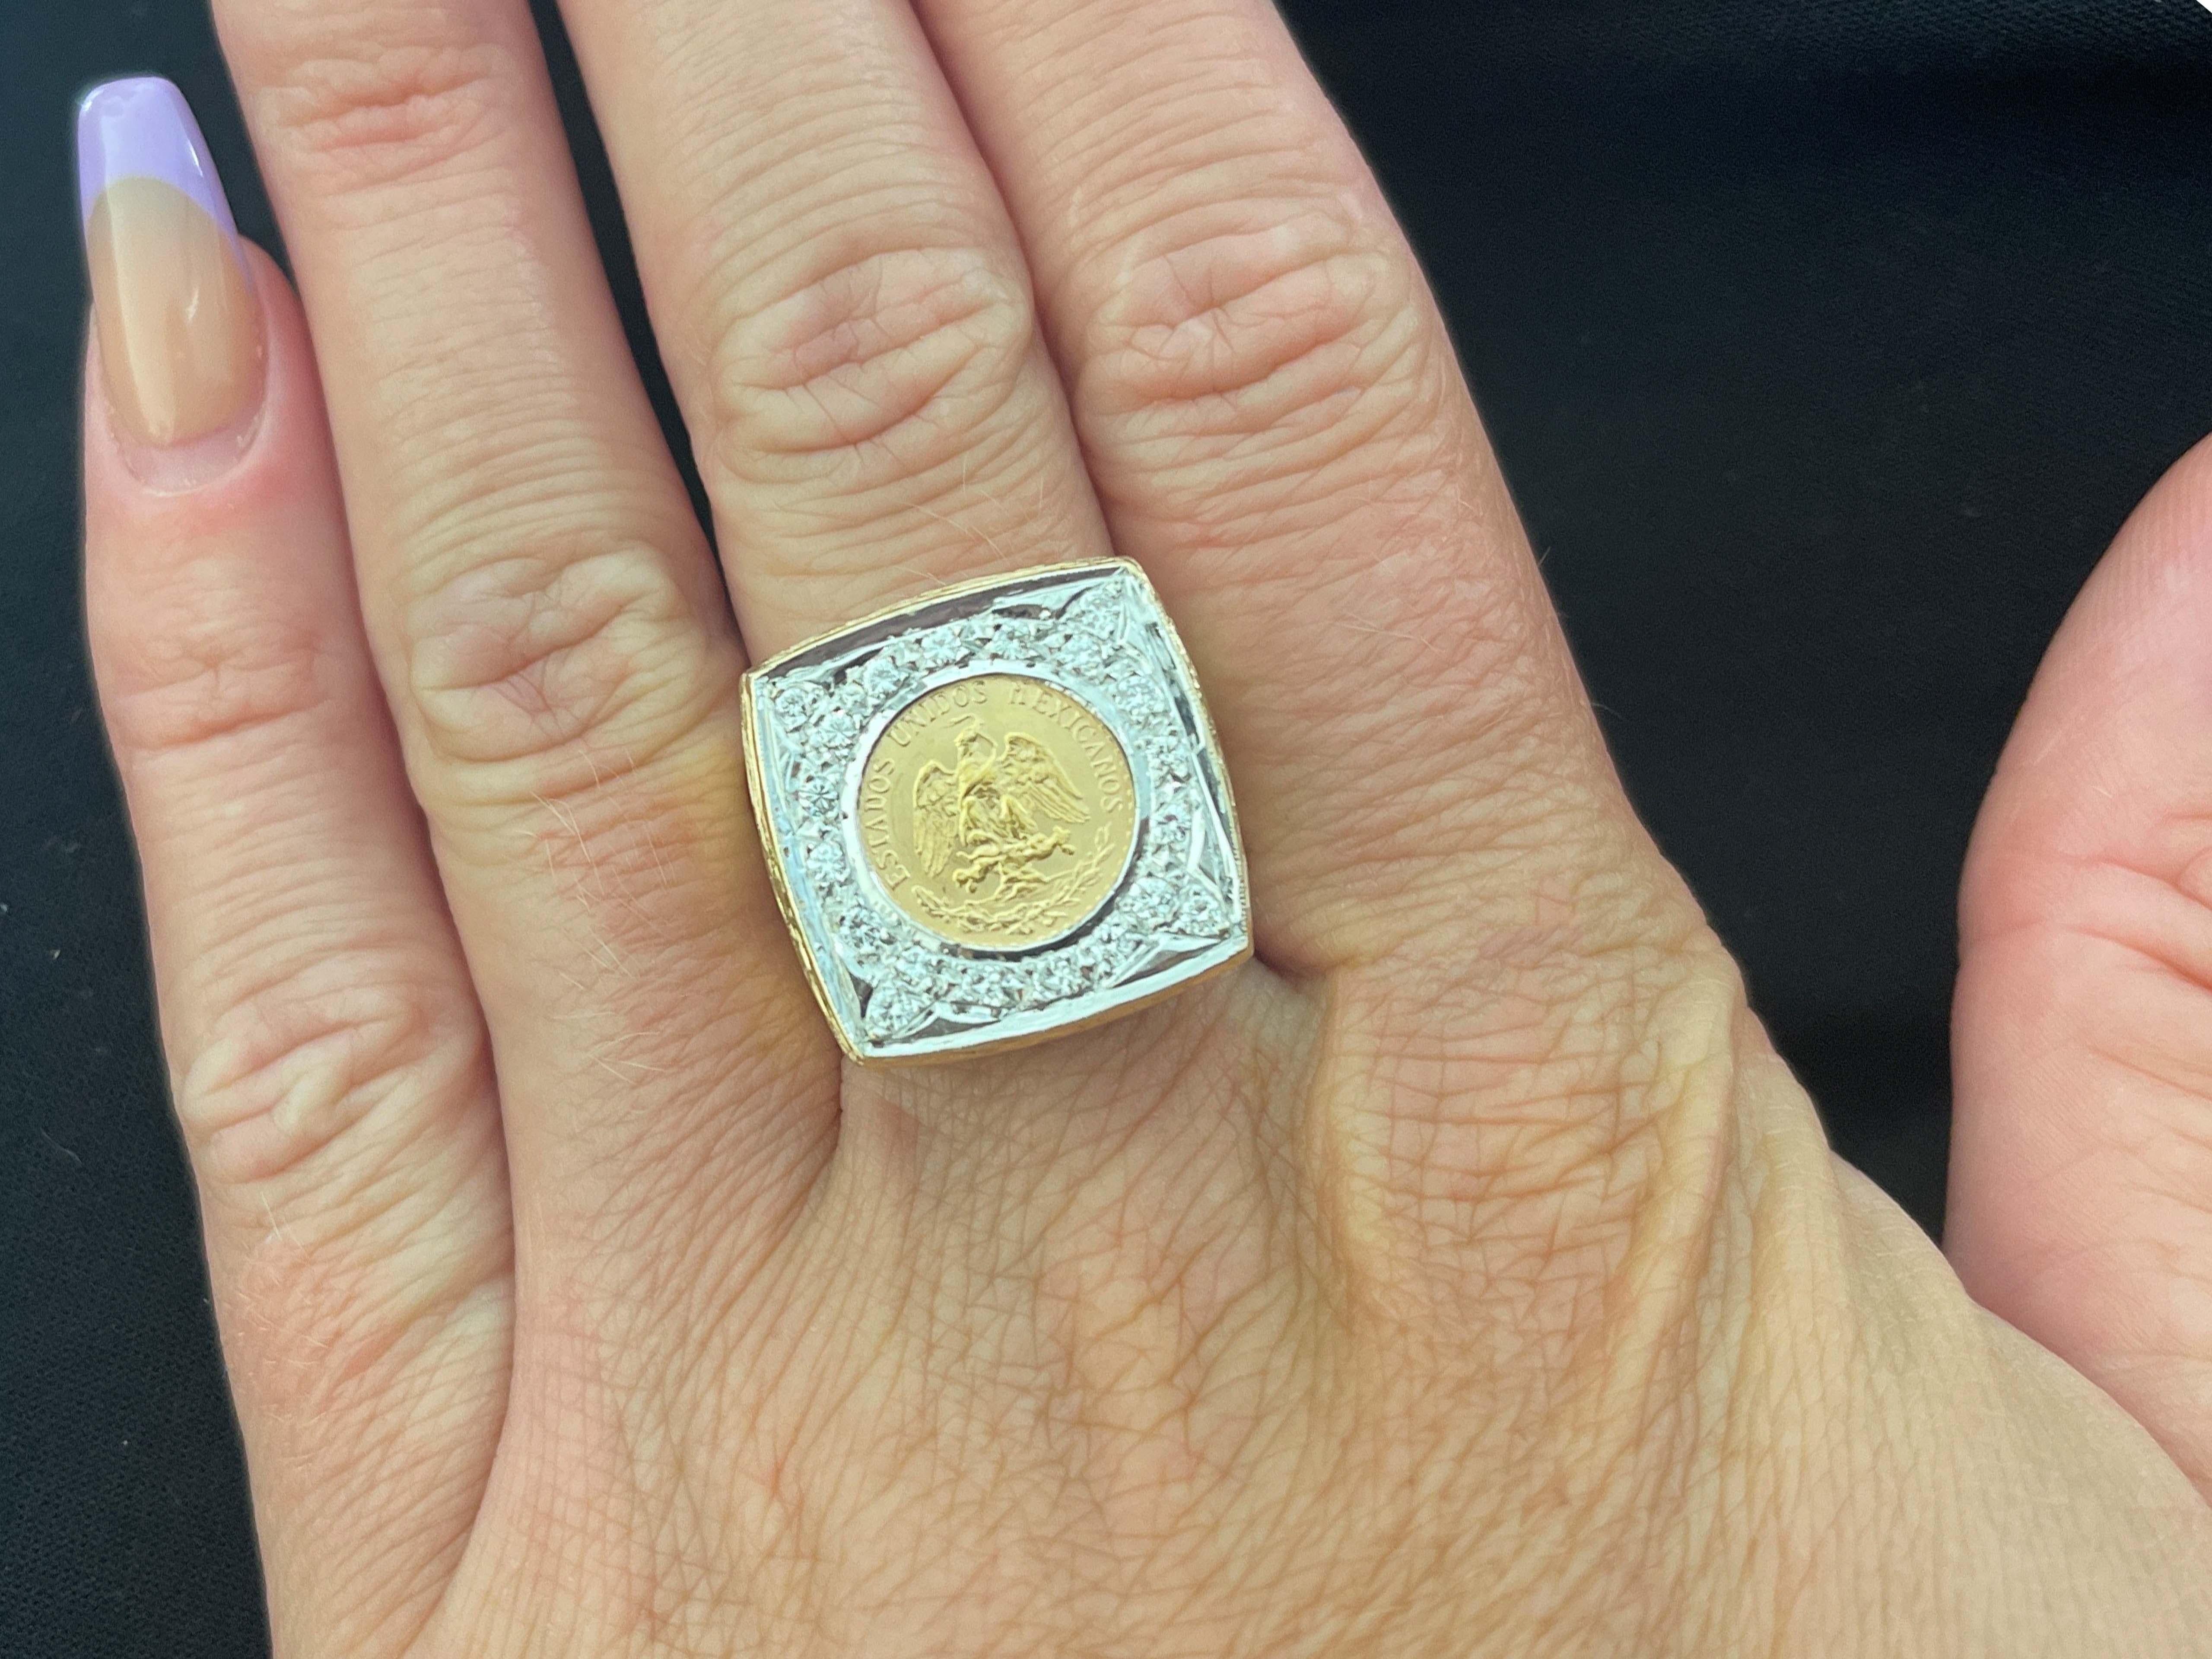 Mens Gold 2.00 Mexican Peso Coin Pinky Ring, 14K Yellow Gold. Size 9
Vintage men's 2.00 gold Mexican peso Coin Ring in 14K yellow gold. This beautiful ring features a 1945 2.00 (Dos Pesos) Gold Mexican coin with a diamond bezel around the coin.